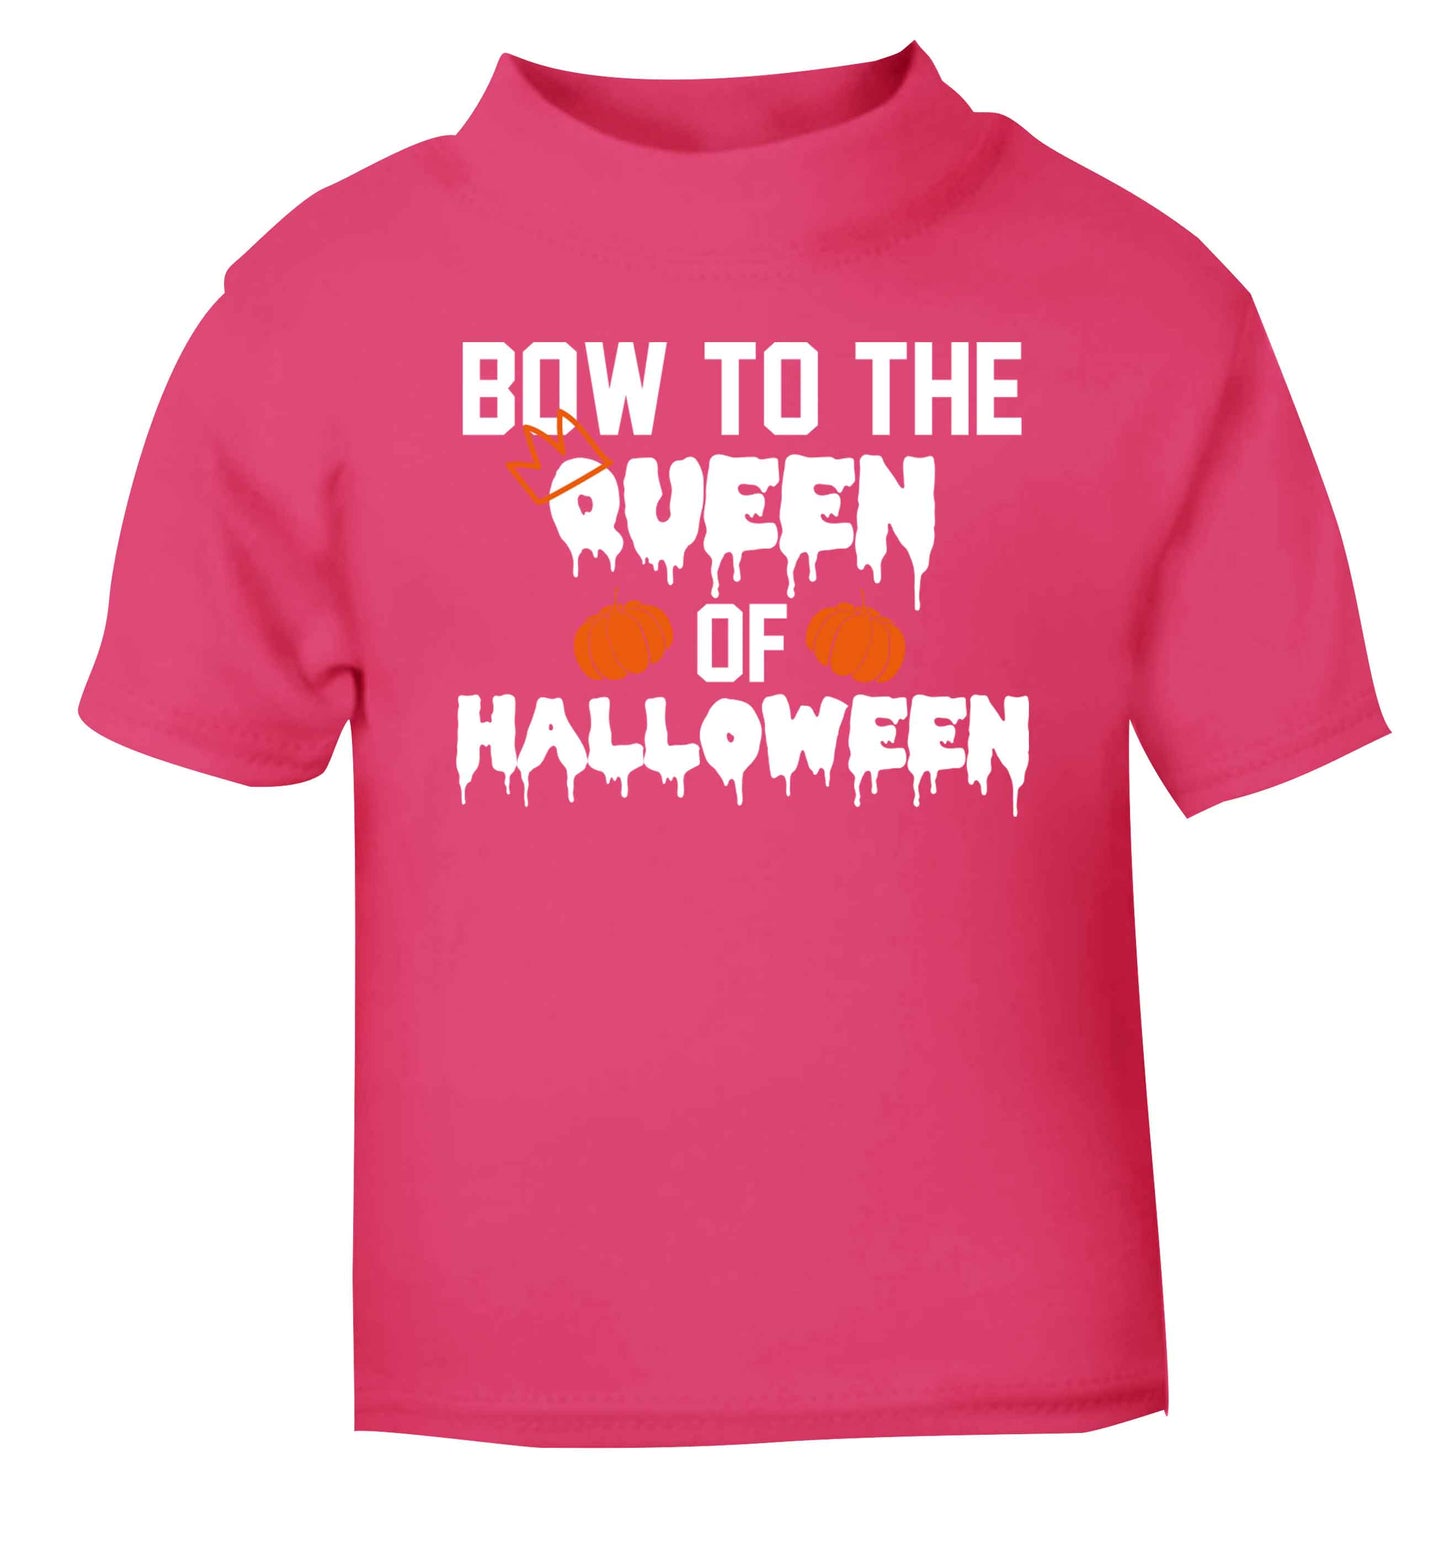 Bow to the Queen of halloween pink baby toddler Tshirt 2 Years